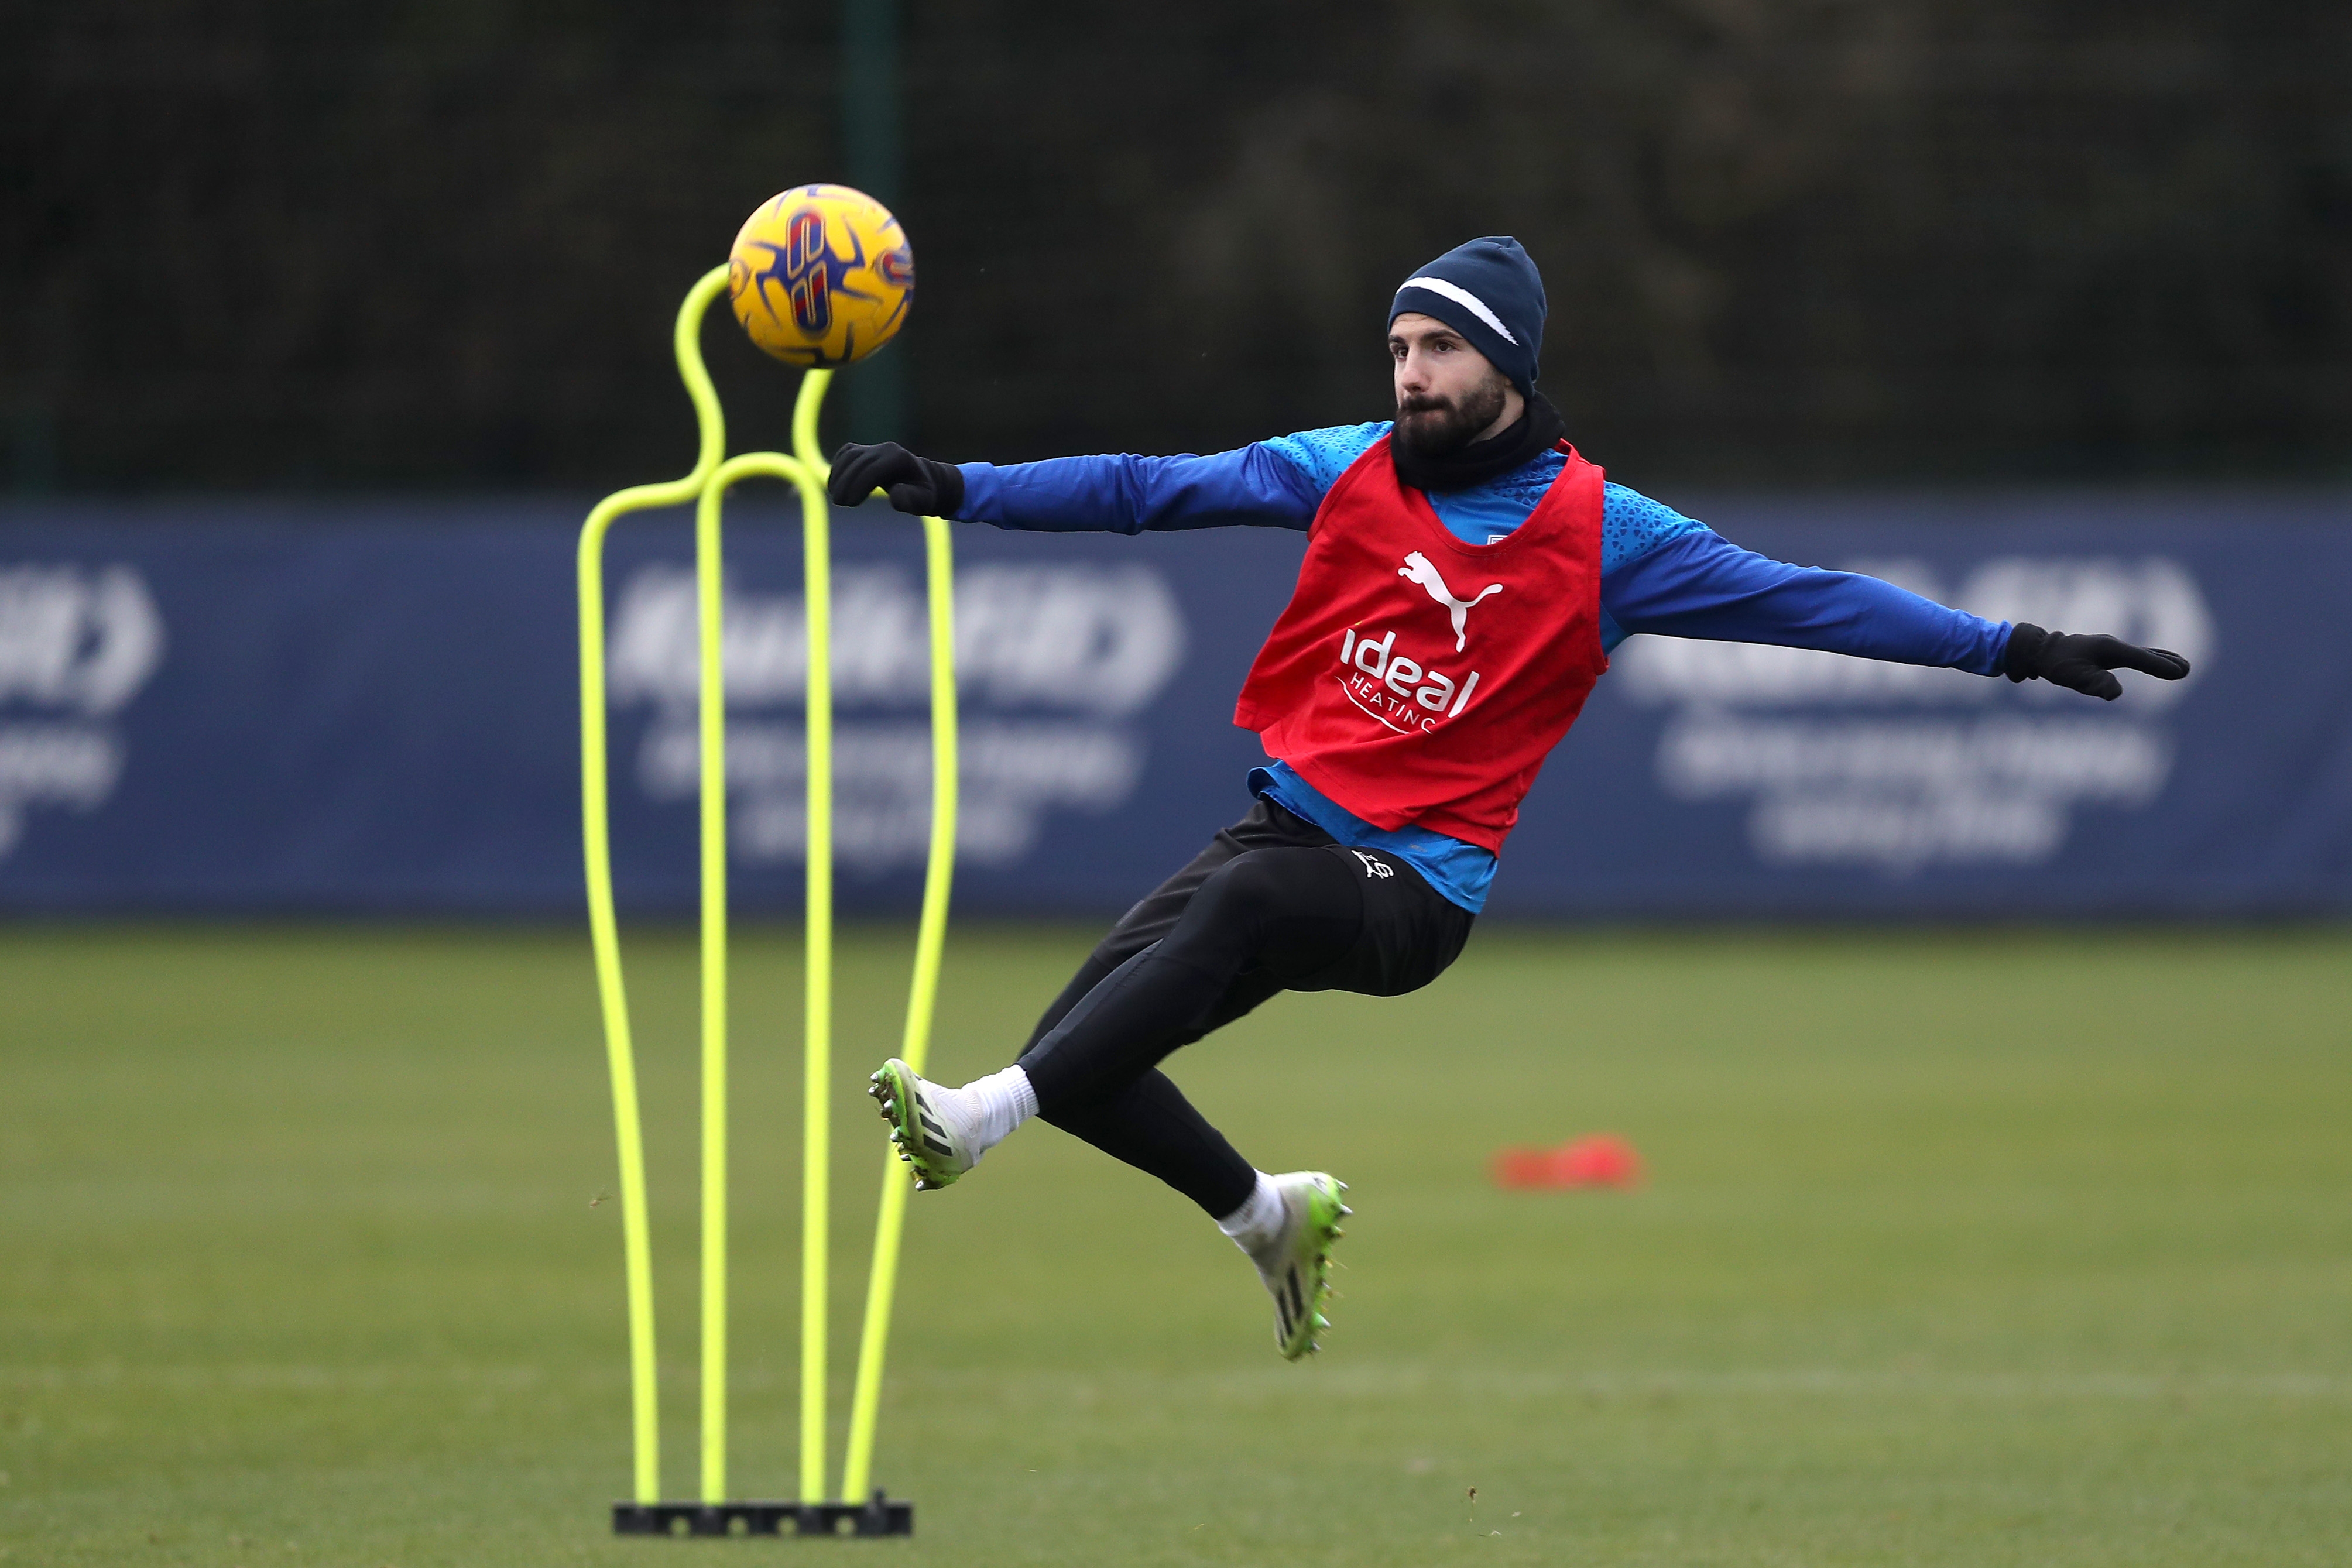 Pipa prepares to acrobatically kick the ball in training 